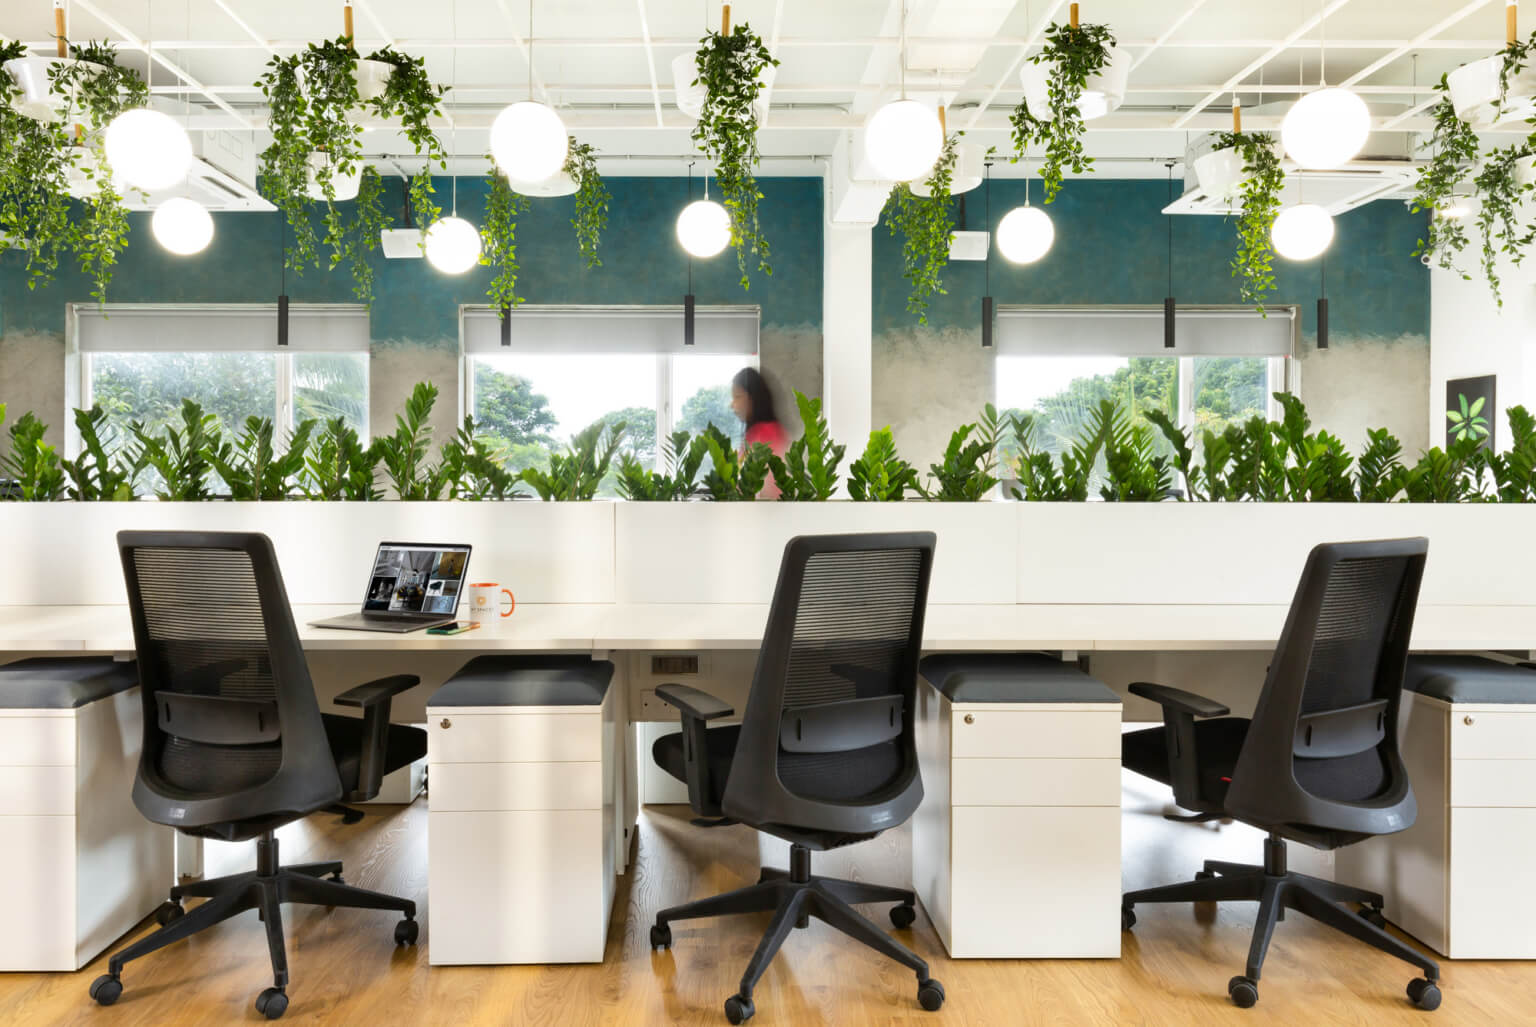 Why invest in greening your office 5